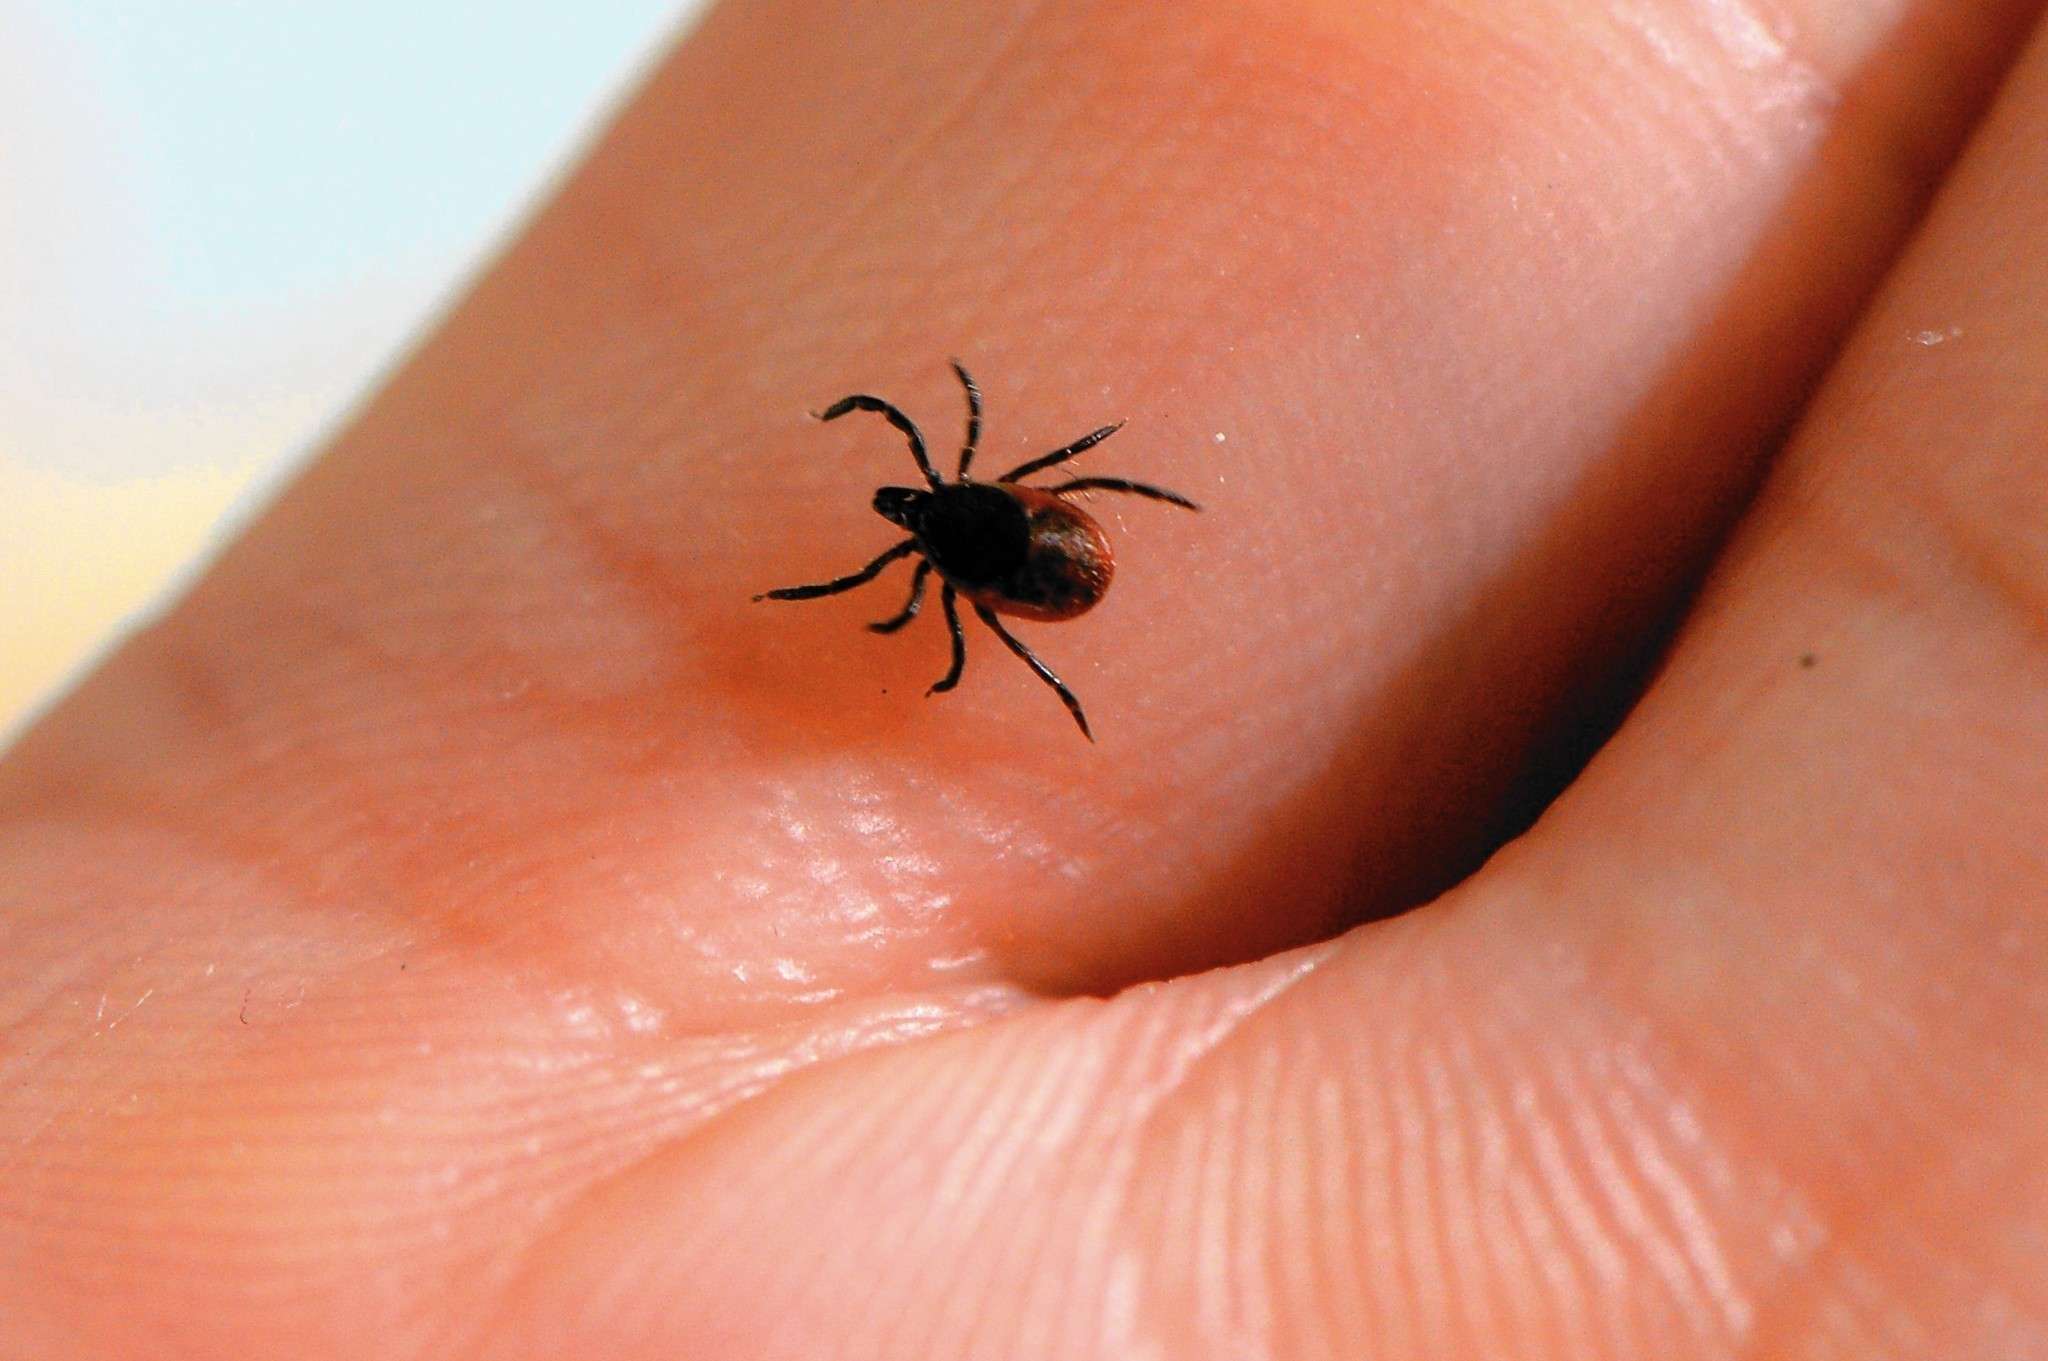 New research finds 1 in 5 deer ticks carry Lyme disease in ...